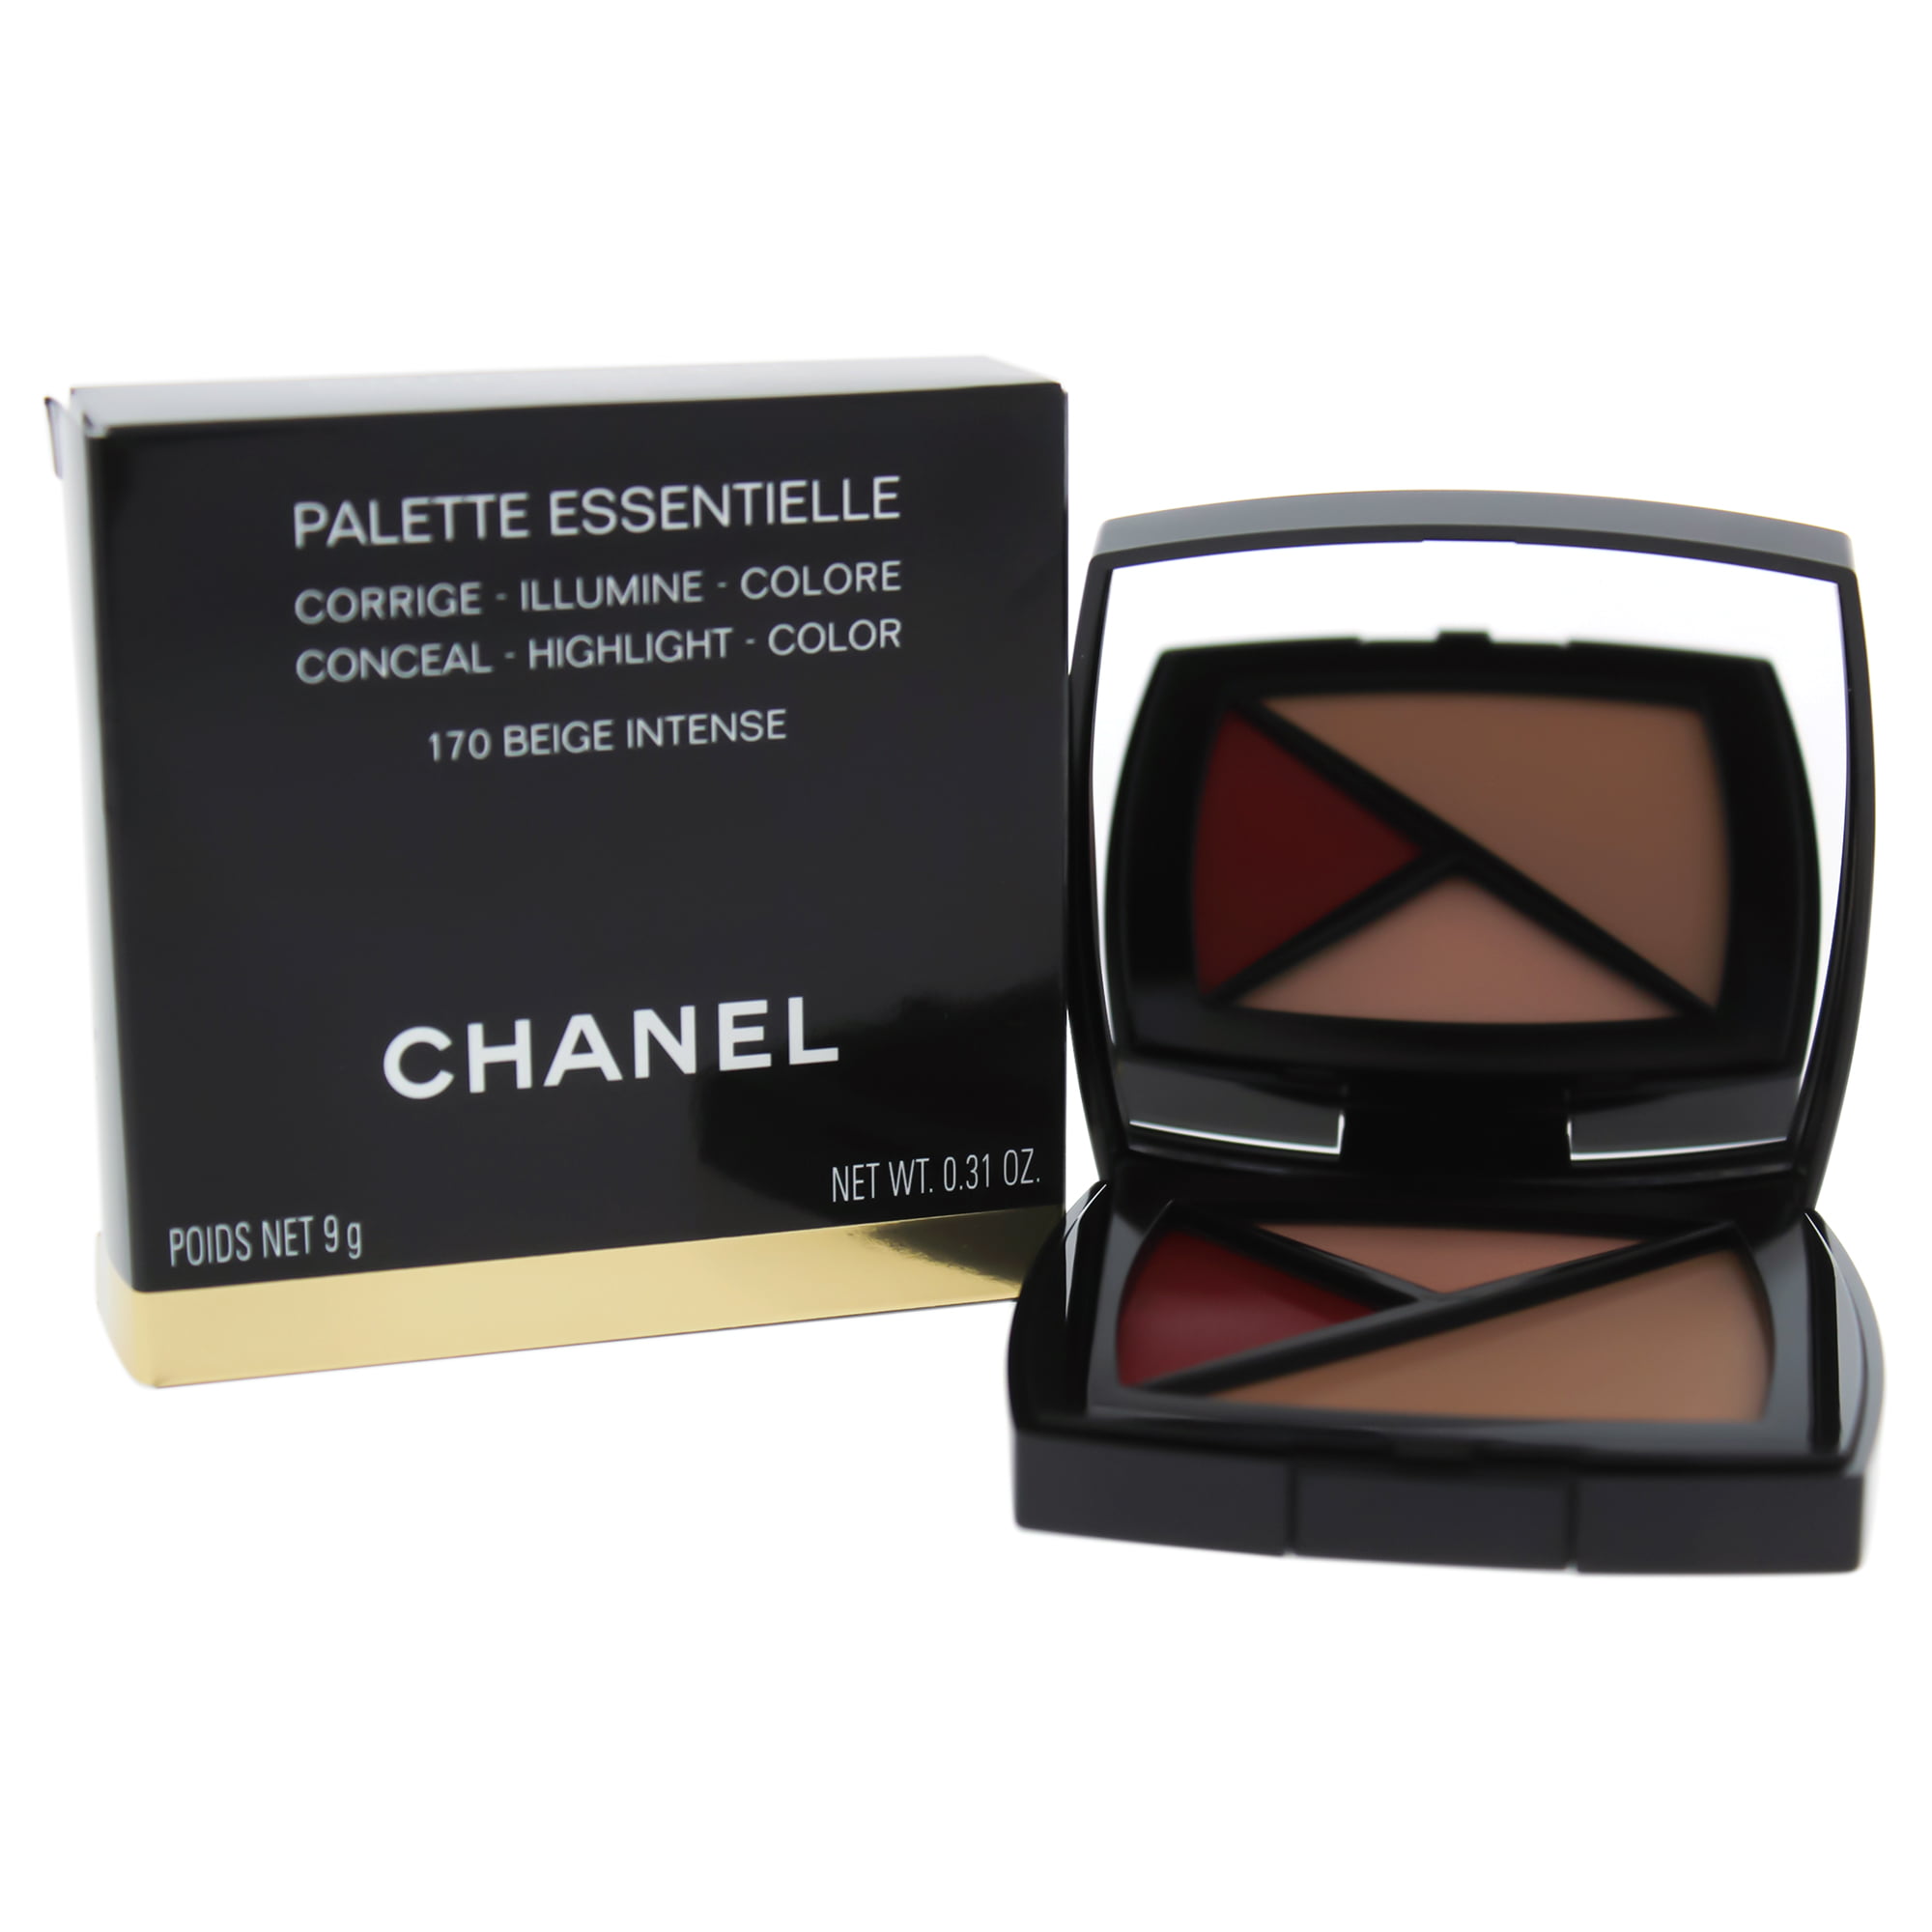 FREE SHIPPING - CHANEL PALETTE ESSENTIELLE (CONCEAL, HIGHLIGHT AND COLOR) –  # 170 BEIGE INTENSE